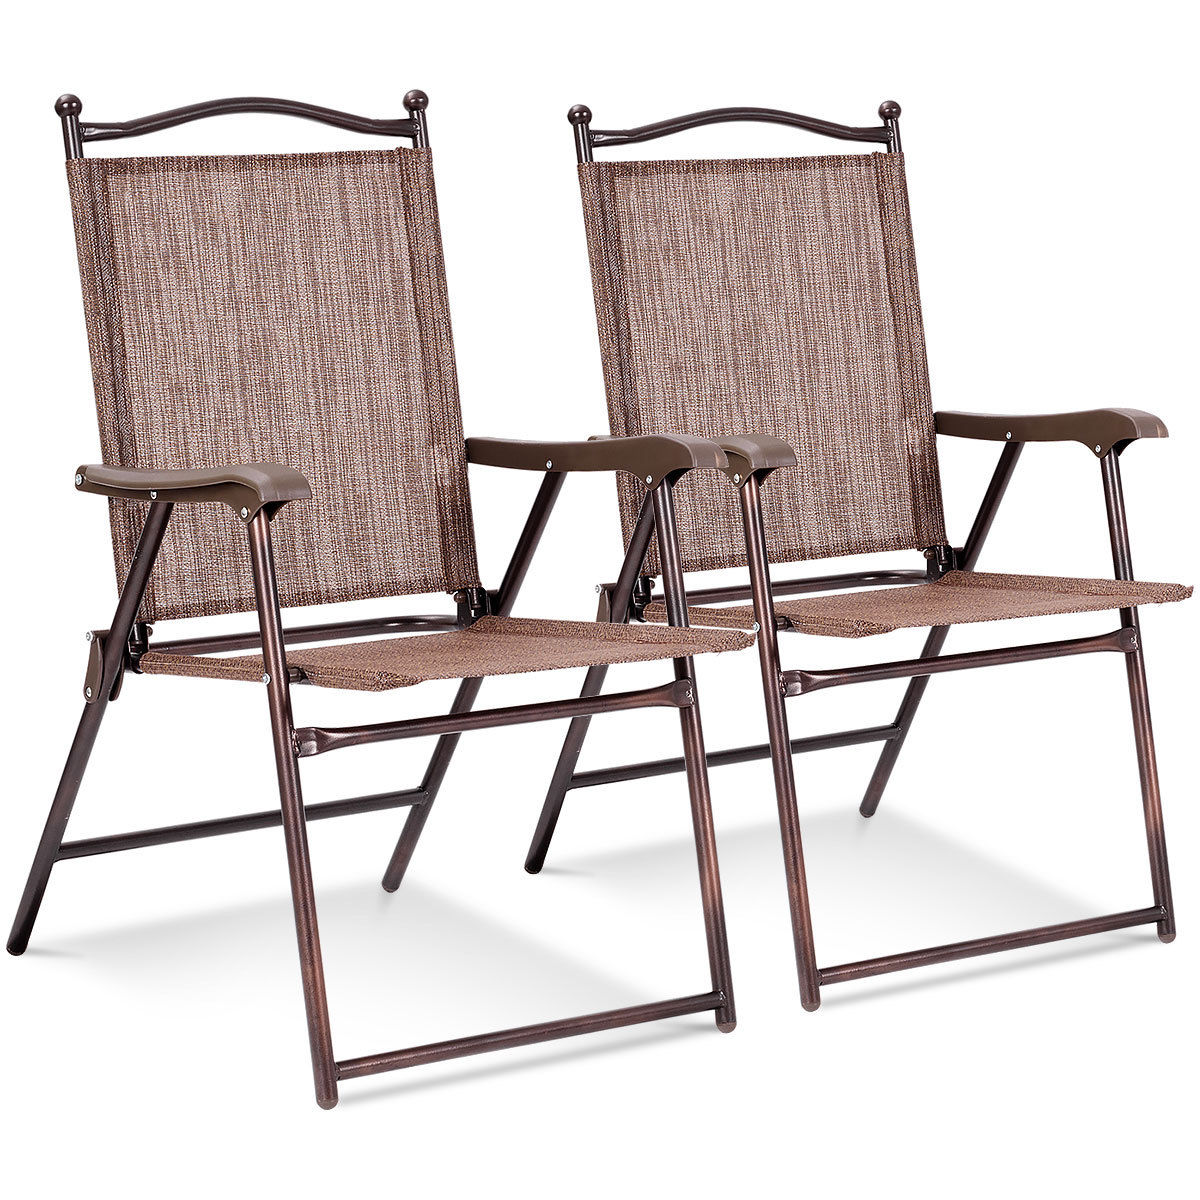 Costway Set of 2 Patio Folding Sling Back Chairs Camping Deck Garden Beach Brown - image 1 of 9